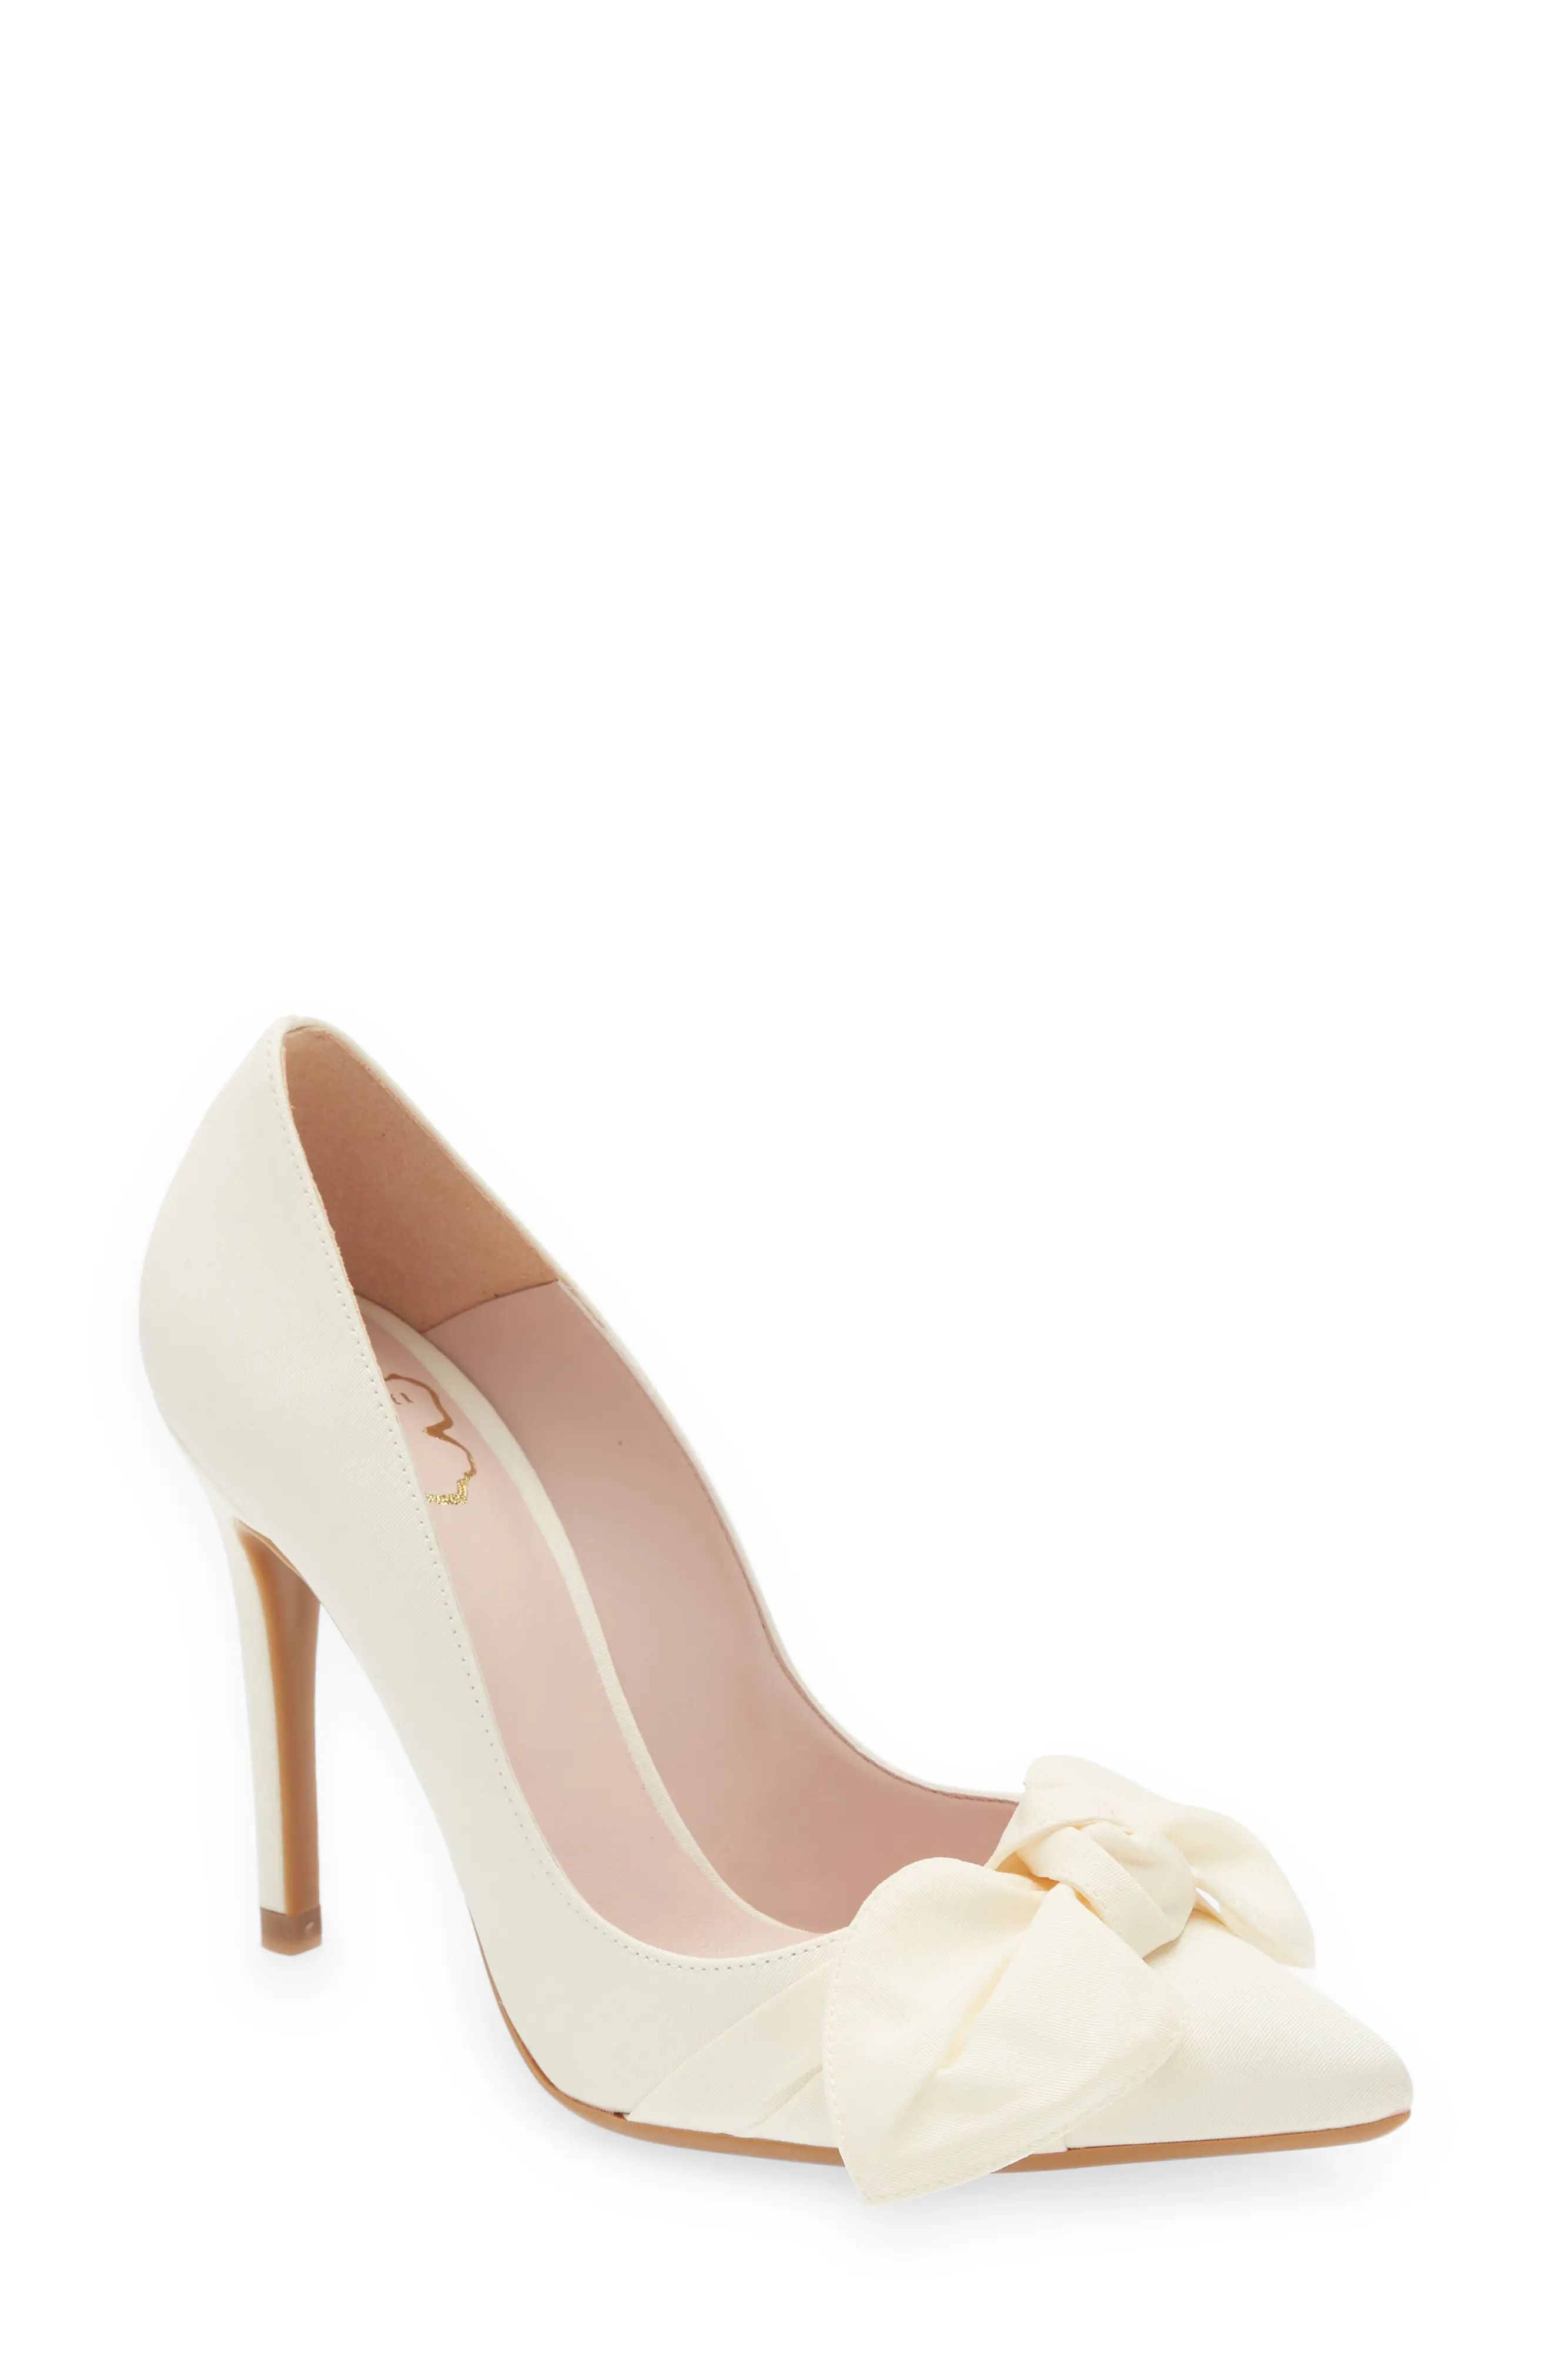 Ted Baker London Hyana Pointed Toe Pump in Ivory at Nordstrom, Size 7Us | Nordstrom